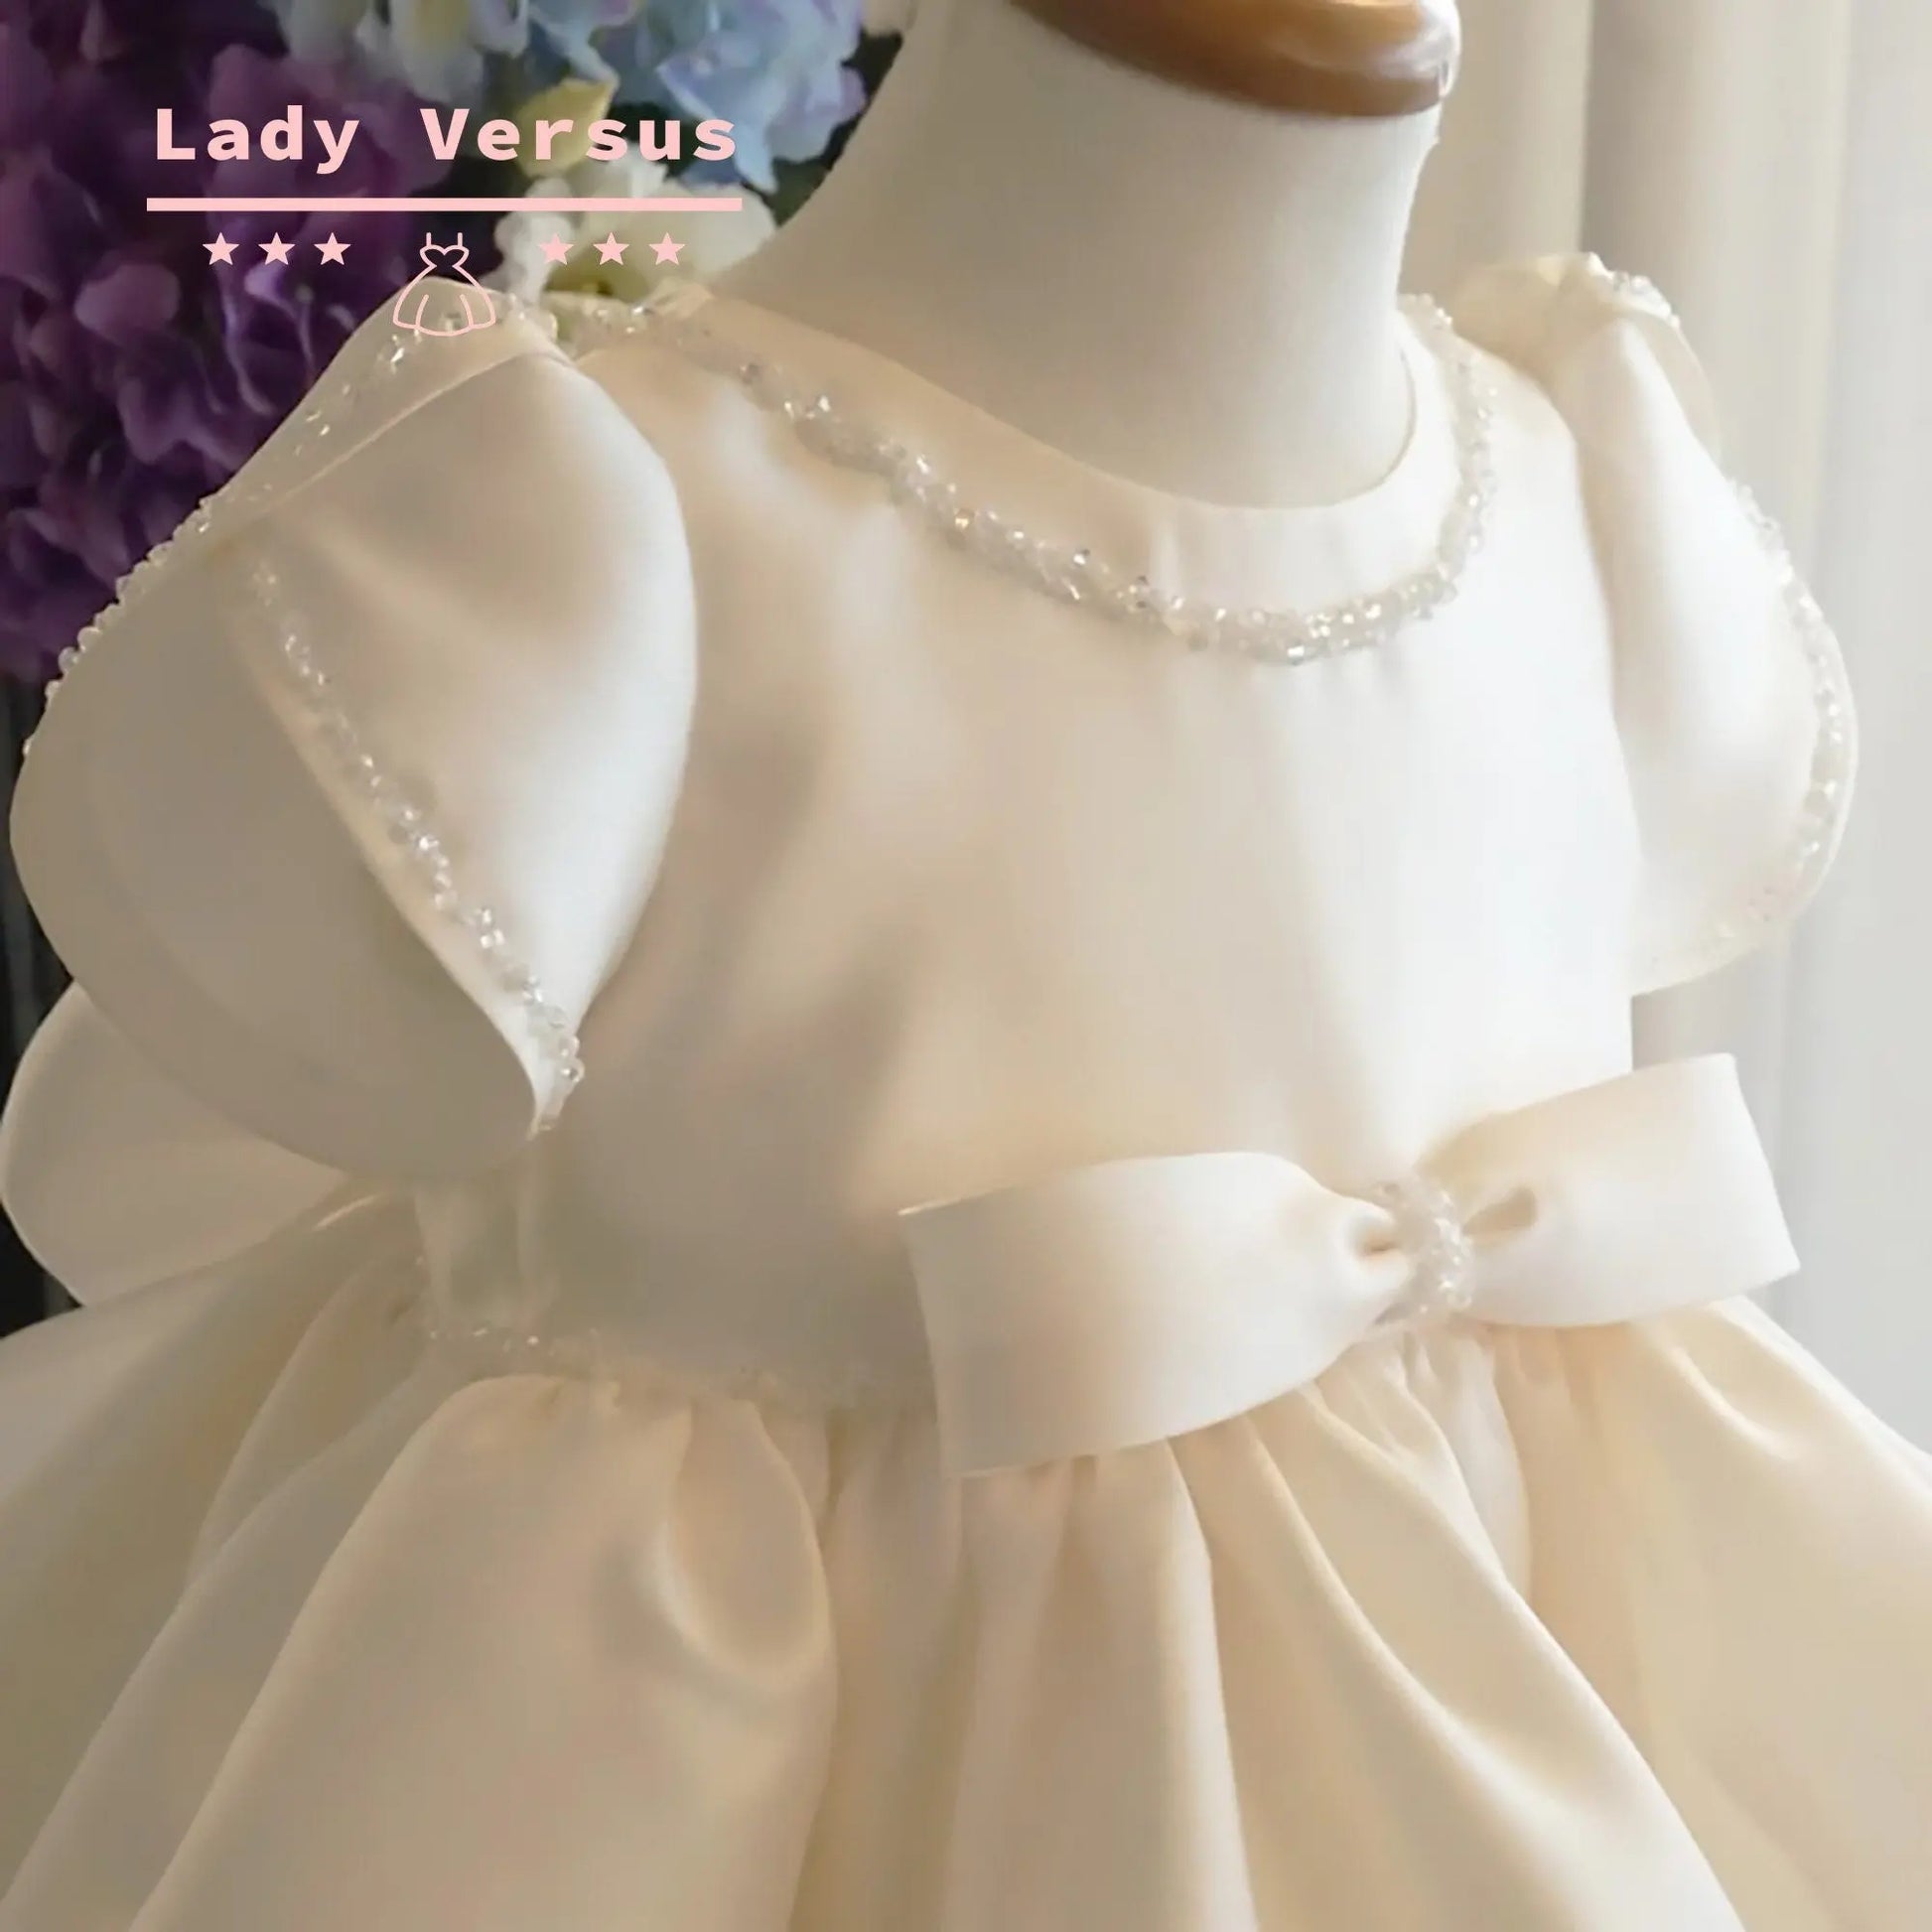 Baby Girl Baptism Dress  | Baby Girl Christening Gown | Baby Girl Baptism Outfit | birthday princess gown / flower girl dress / Off WHITE Lady Versus